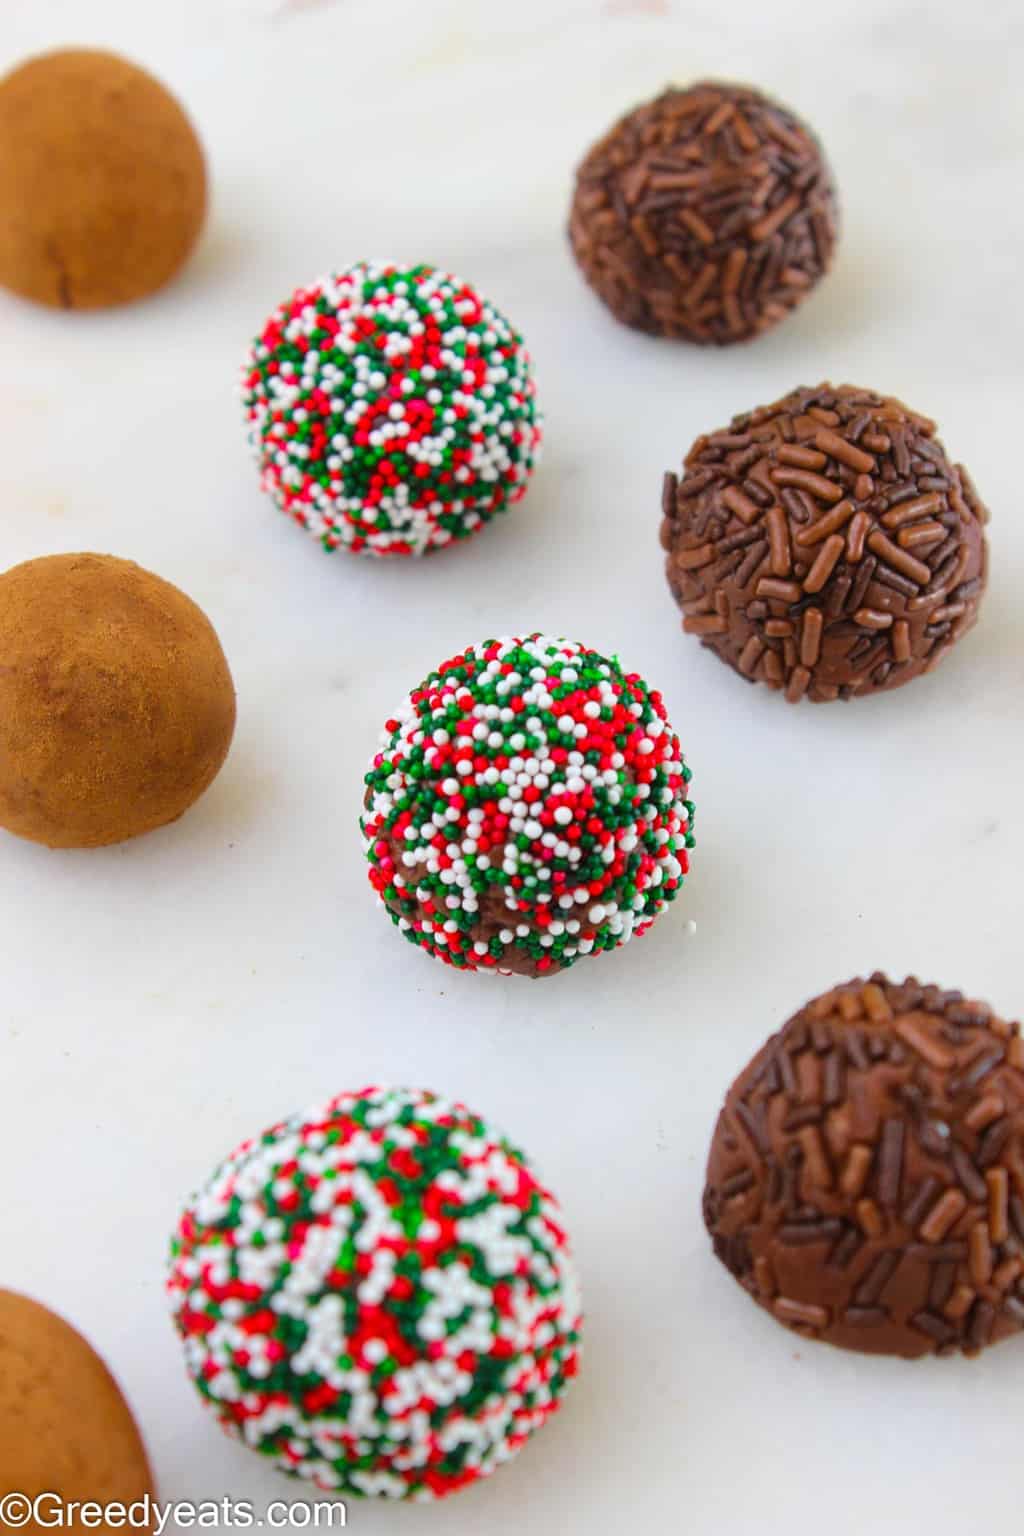 Ditch those chocolate boxes this year and make your own Chocolate Truffles the easiest way!